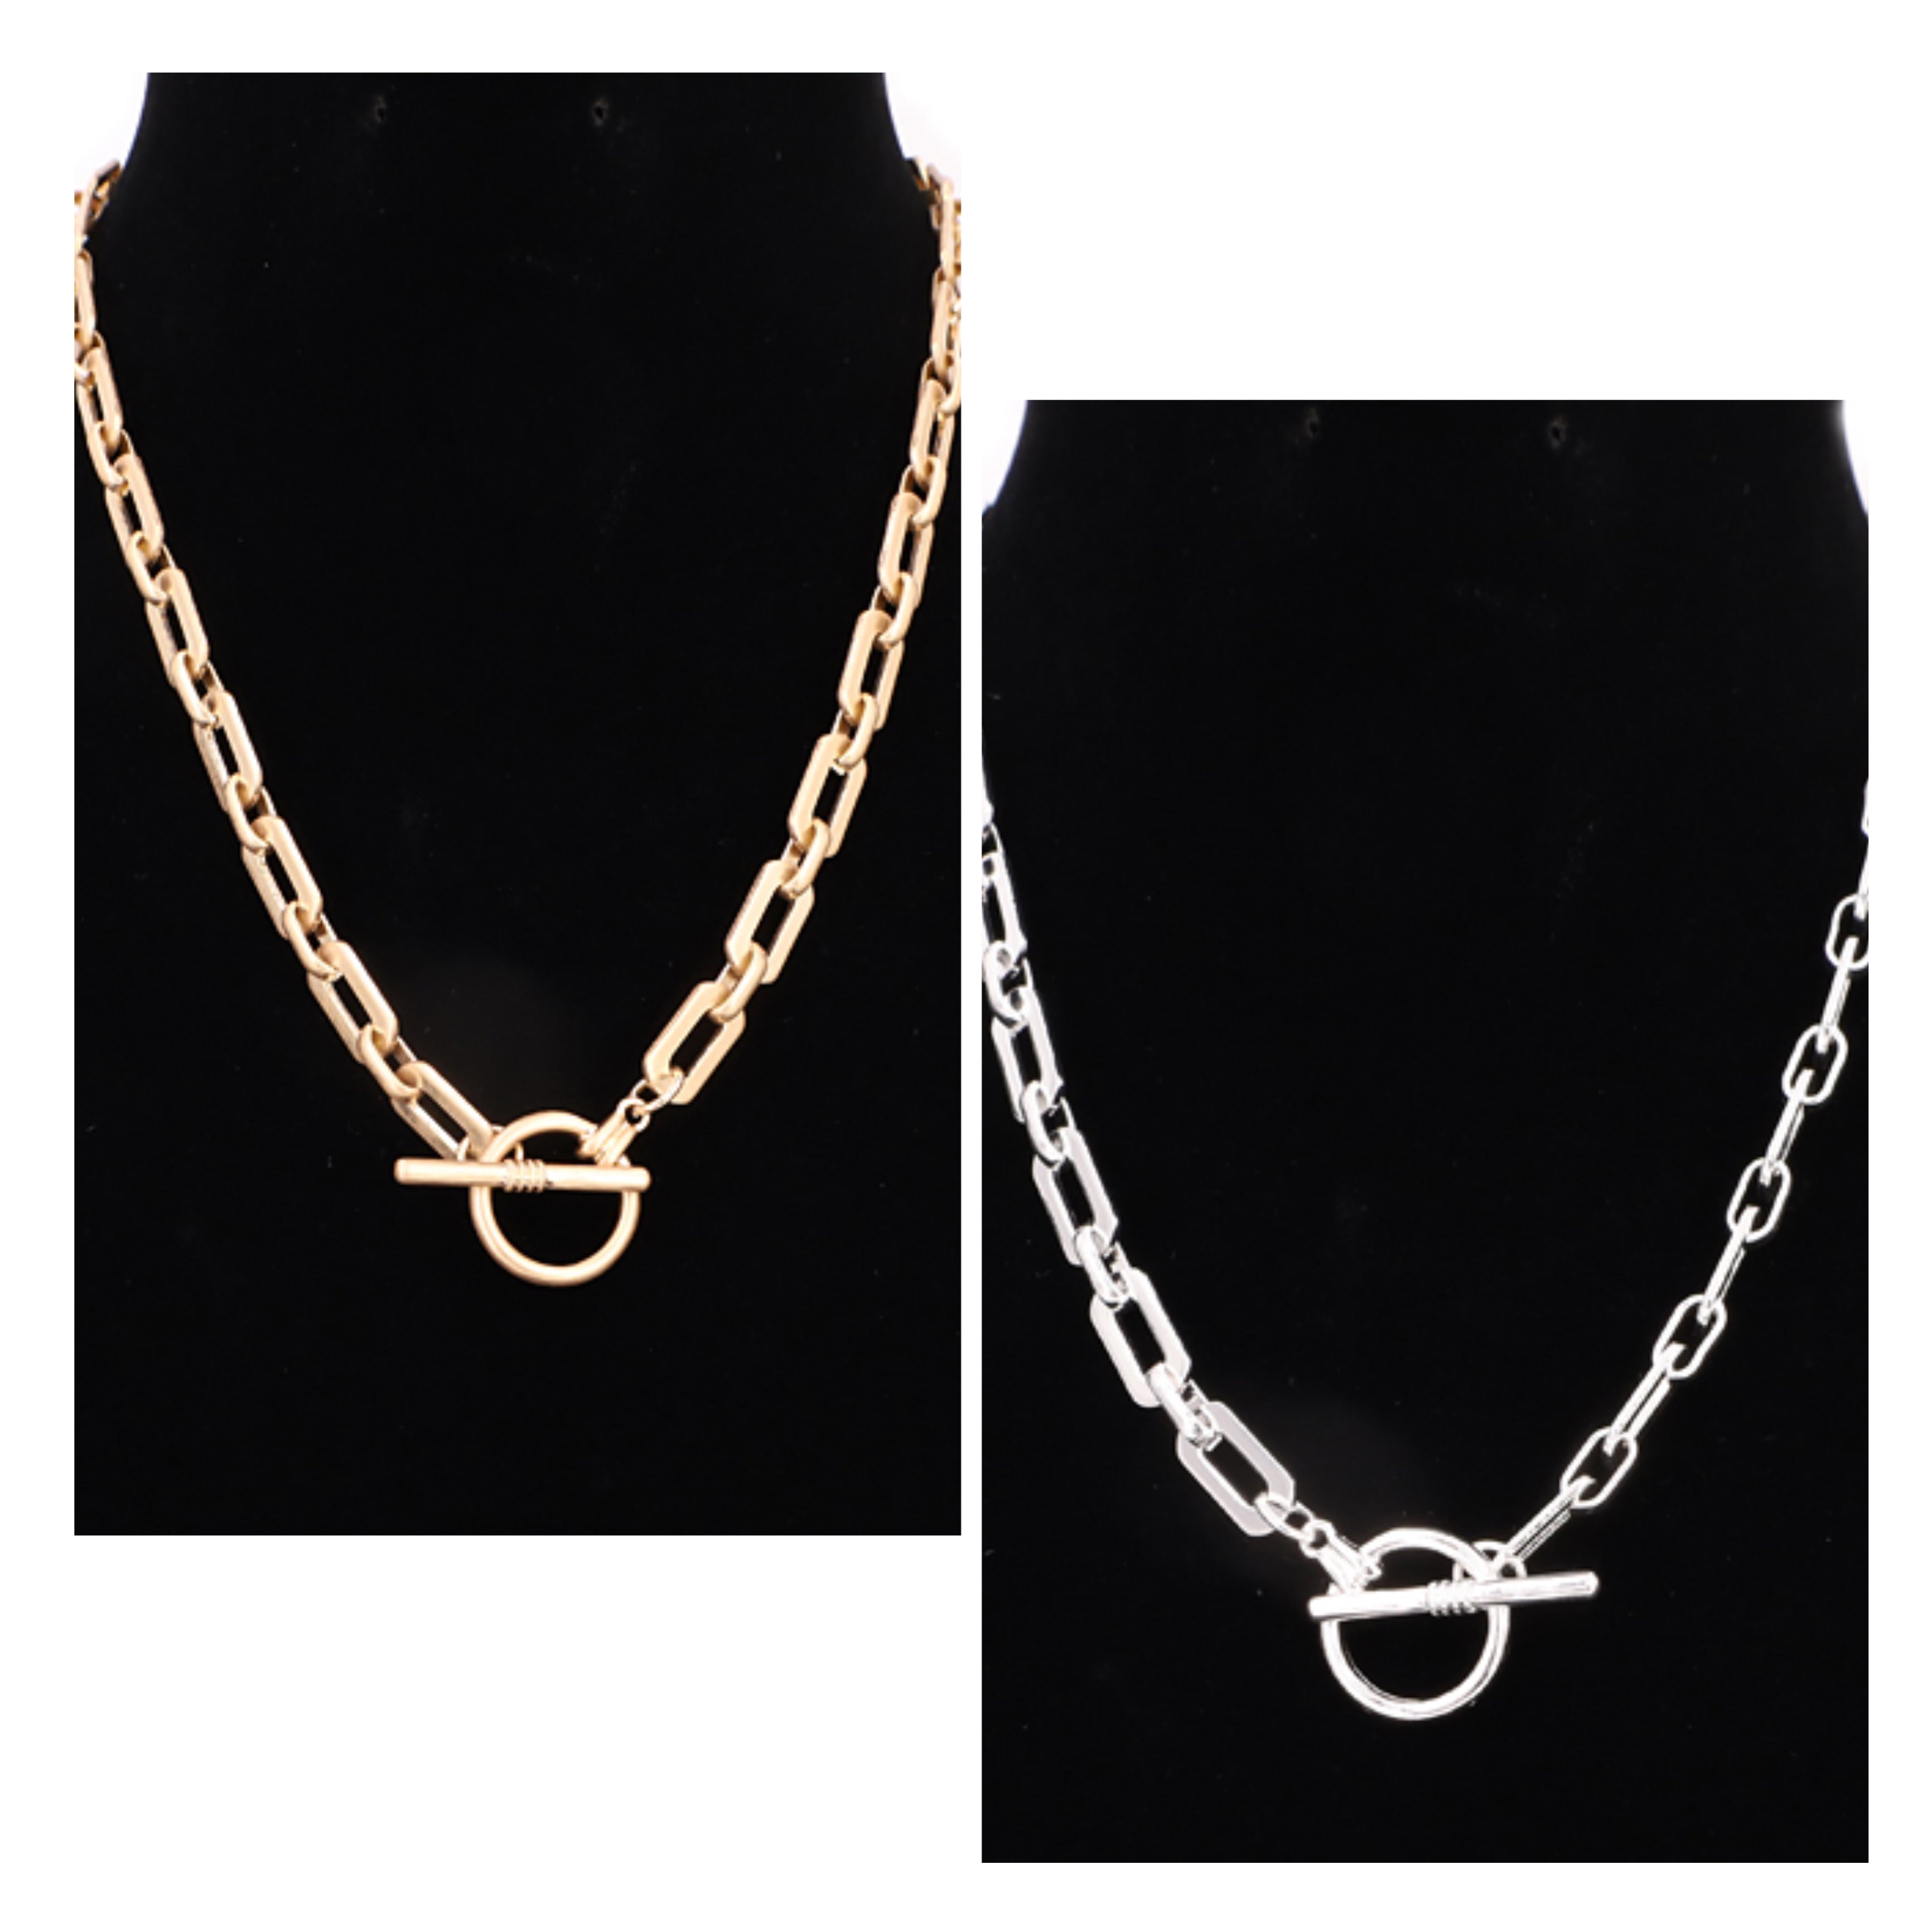 Link chain necklace gold or silver